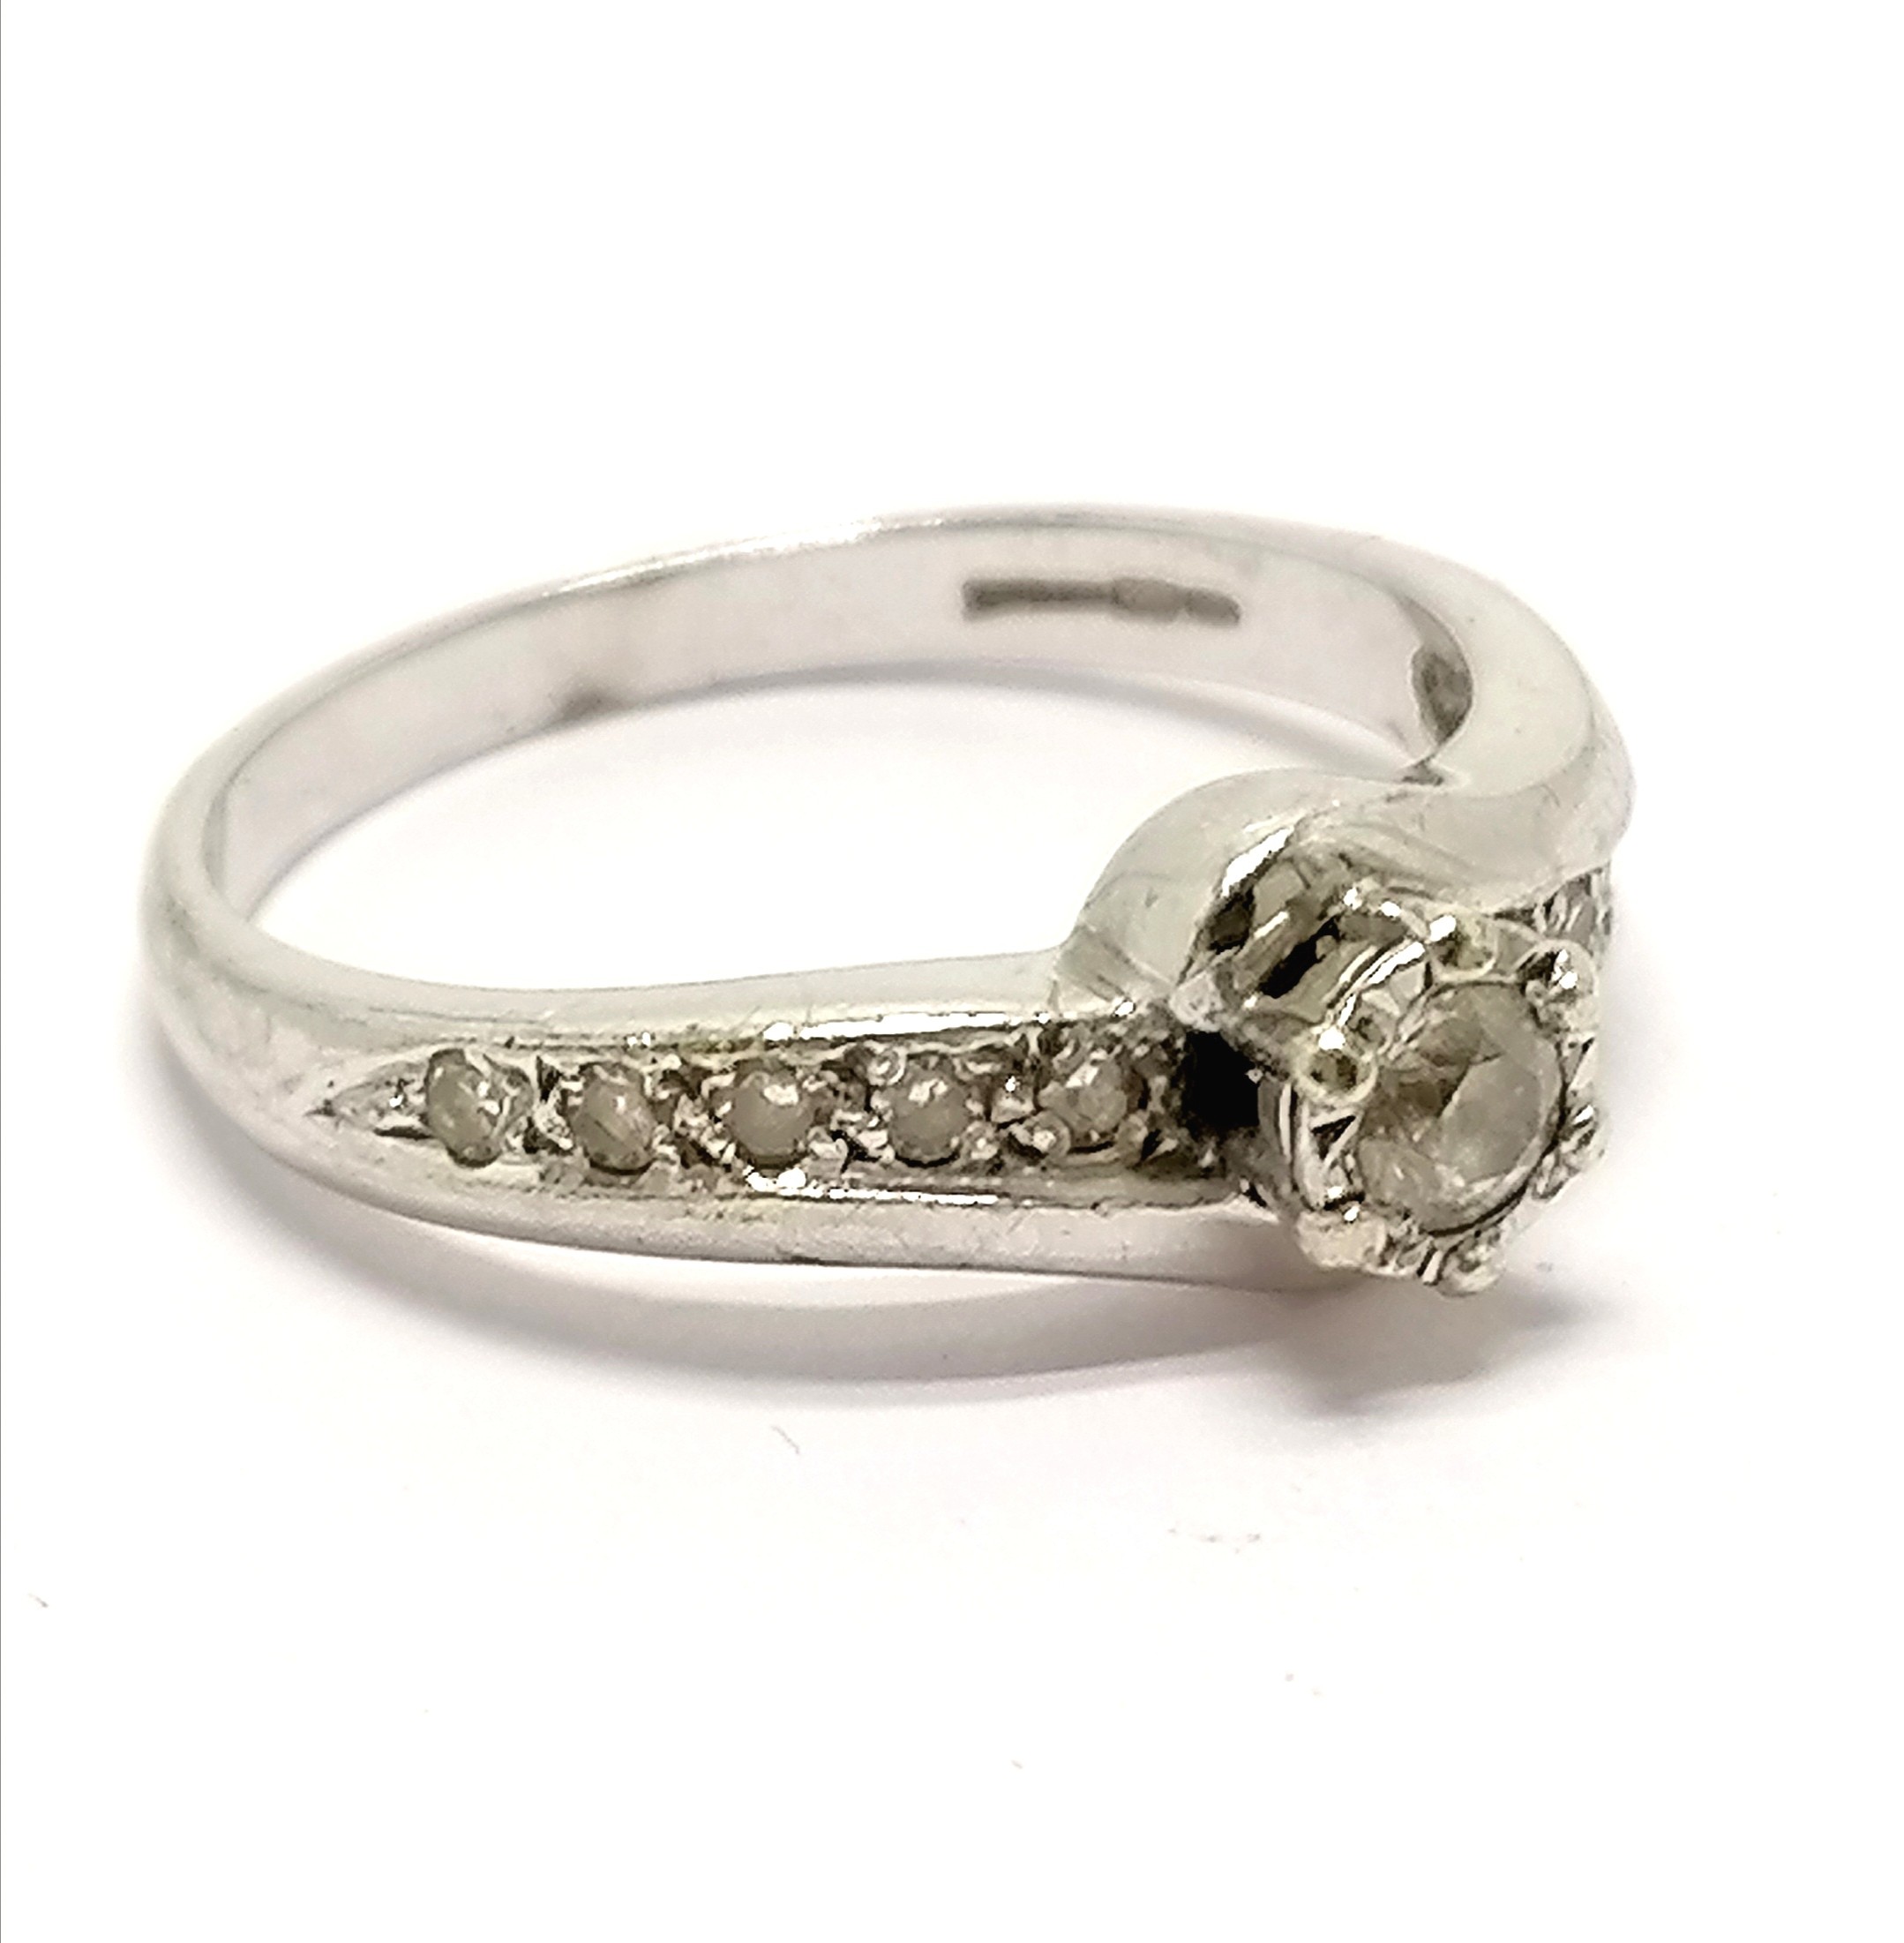 9ct hallmarked white gold solitaire diamond ring with diamond set crossover shoulders - size M & 2. - Image 3 of 3